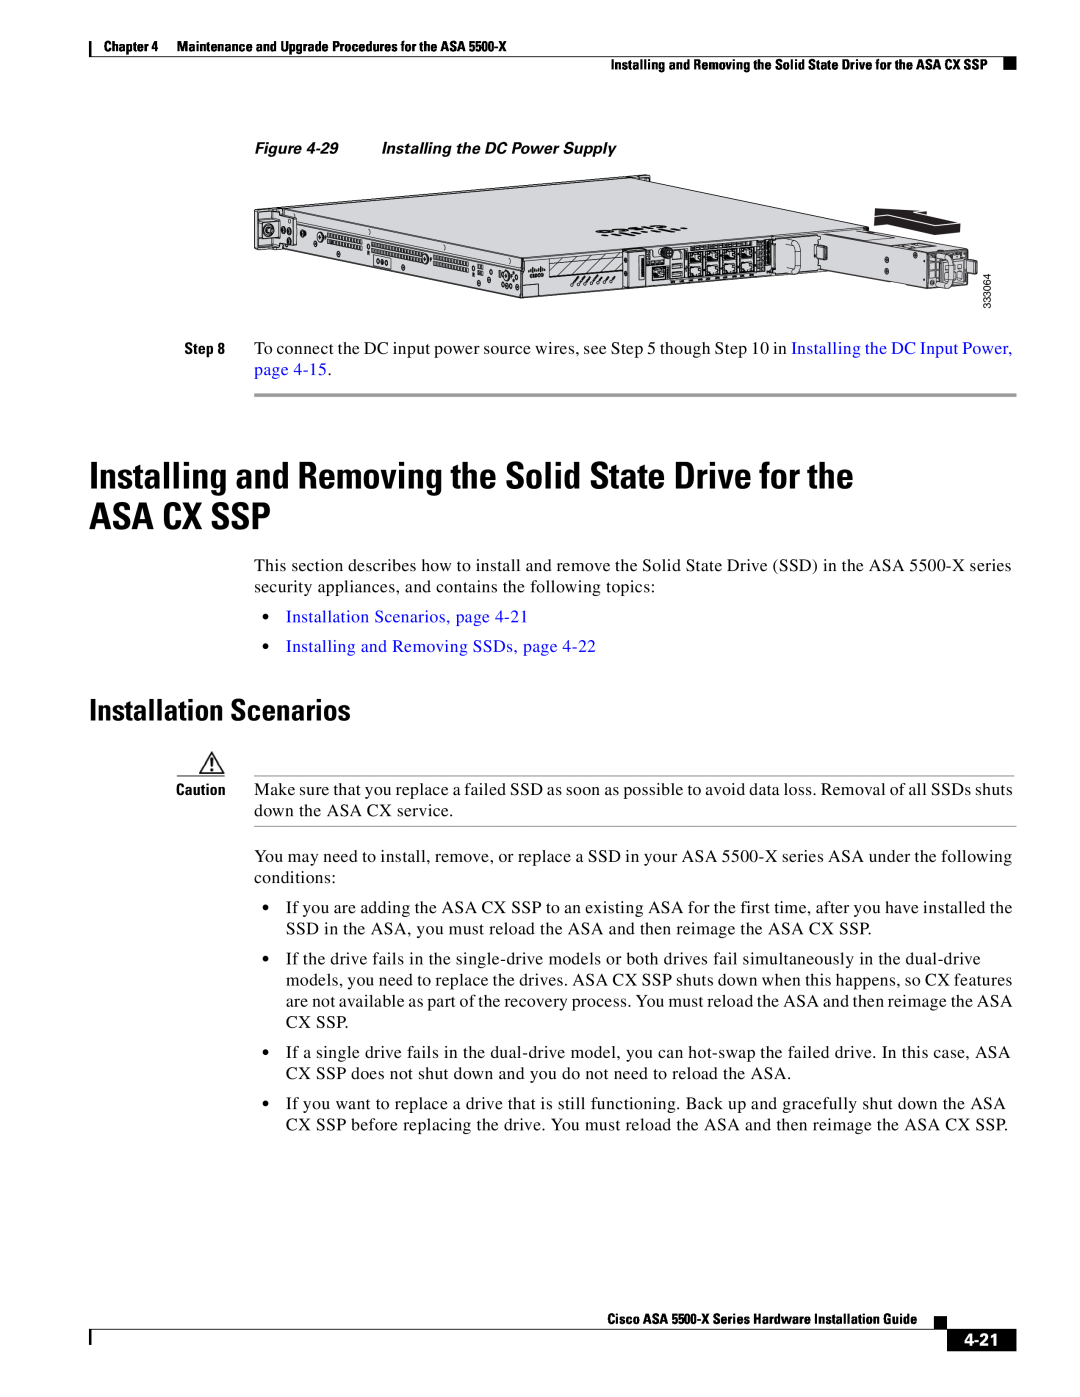 Cisco Systems ASA5515K9 Installing and Removing the Solid State Drive for the ASA CX SSP, Installation Scenarios, 4-21 